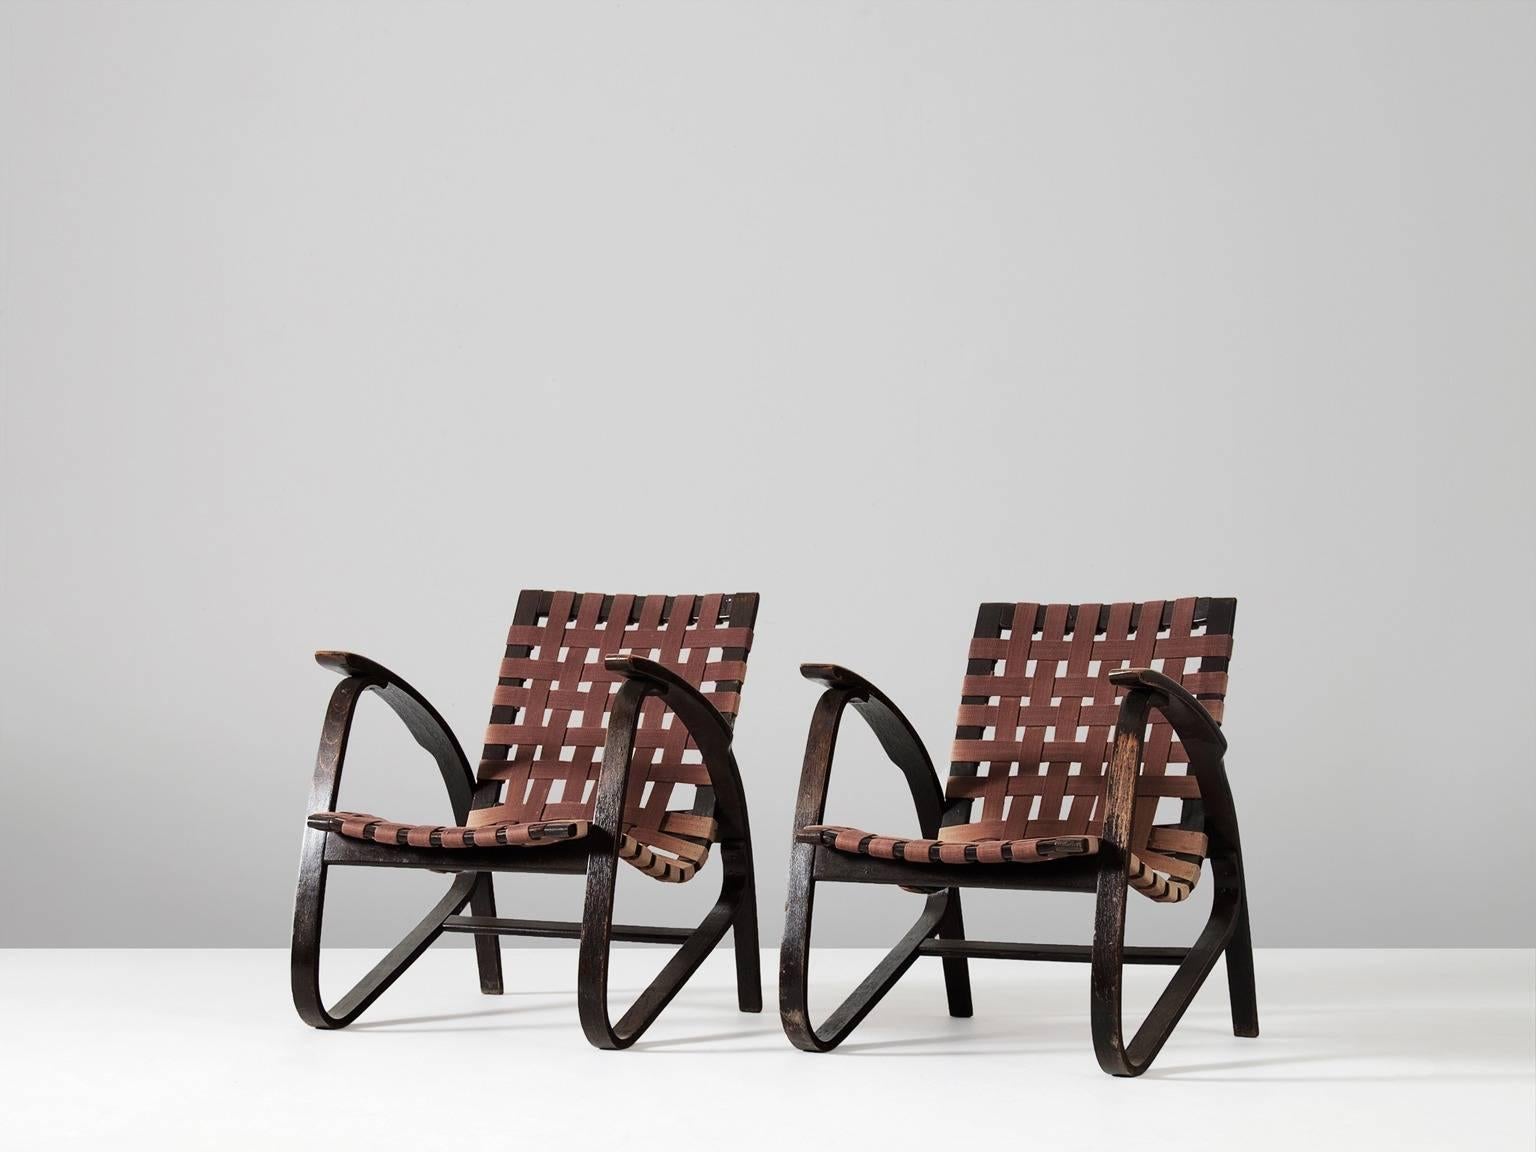 Pair of lounge chairs, in wood and canvas, by Jan Vanek for UP Zavodny, Czech Republic 1930s.   

Stunning pair of dynamic armchairs designed by Czech architect Jan Vanek, who was a contemporary of Jindrich Halabala. These chairs are upholstered